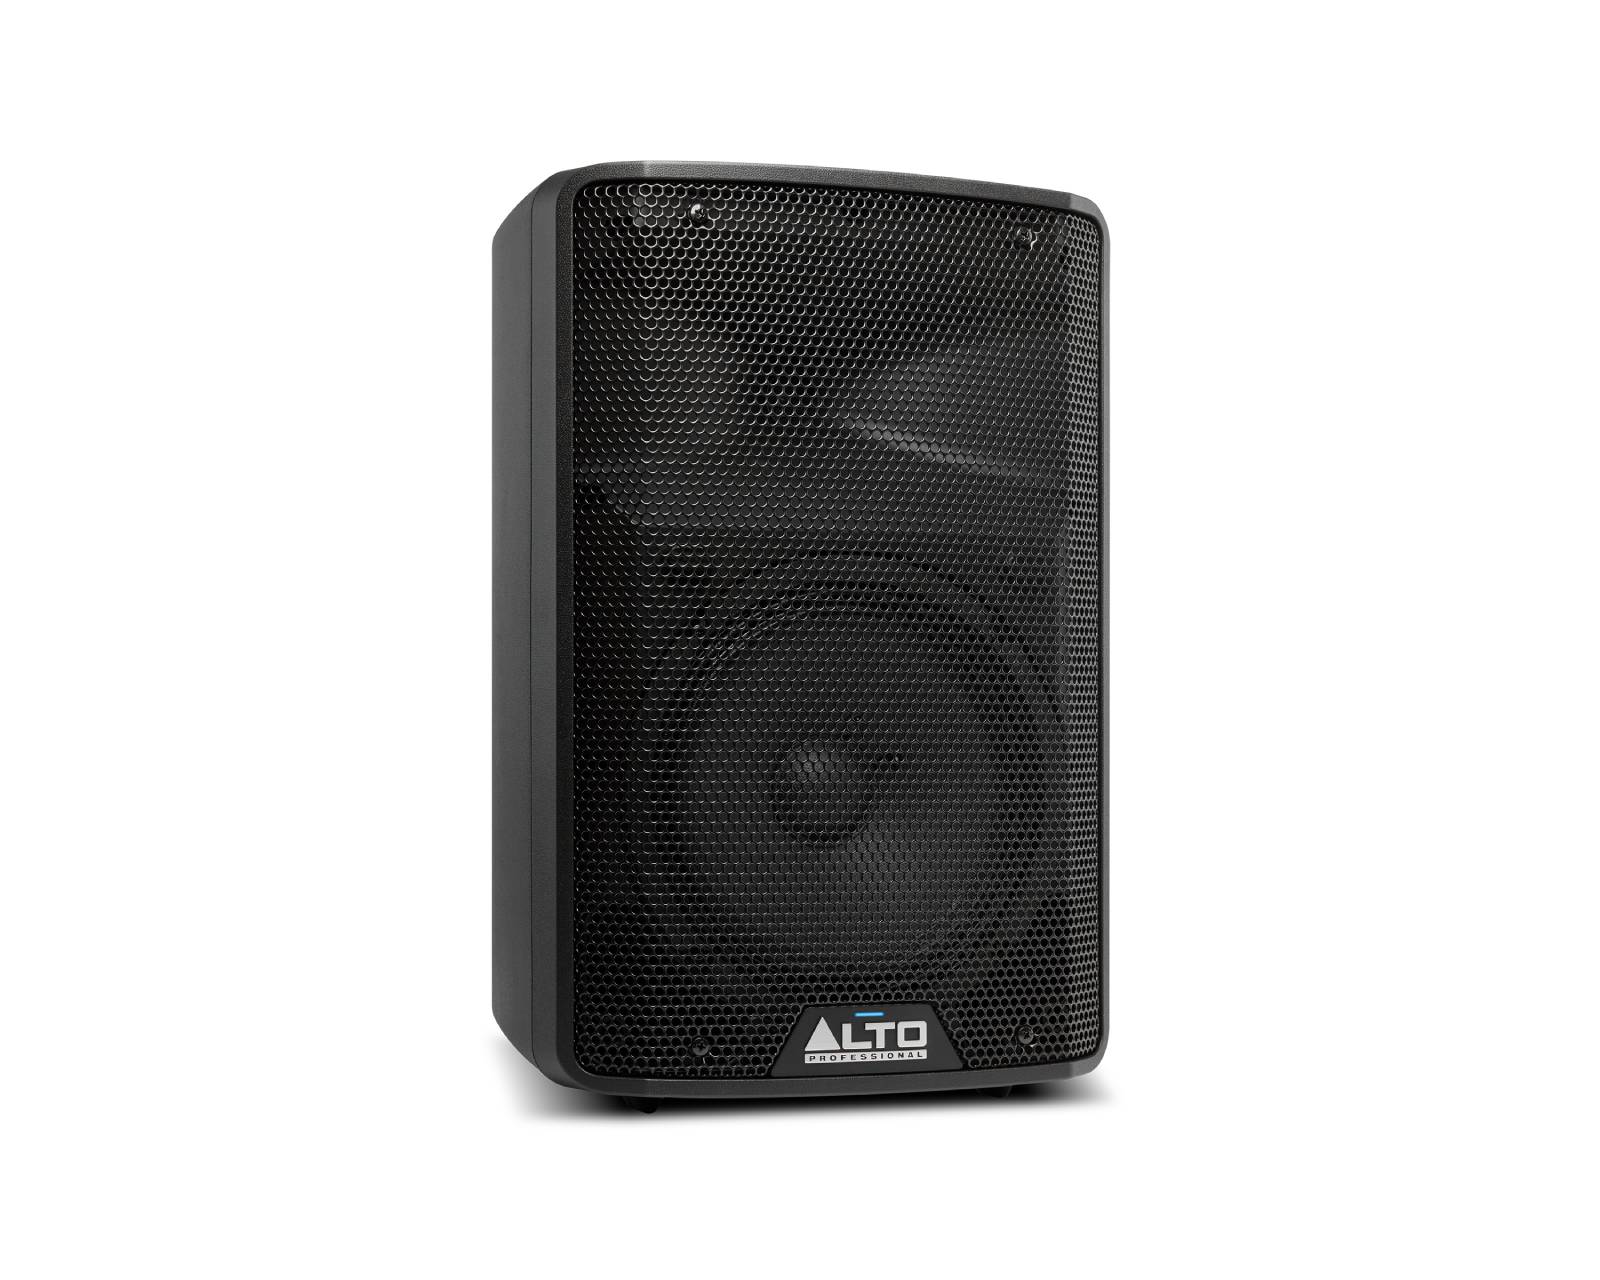 Thorny Oh mild ALTO PROFESSIONAL TX 308 - ACTIVE 8-INCH SPEAKER | Woodbrass.com